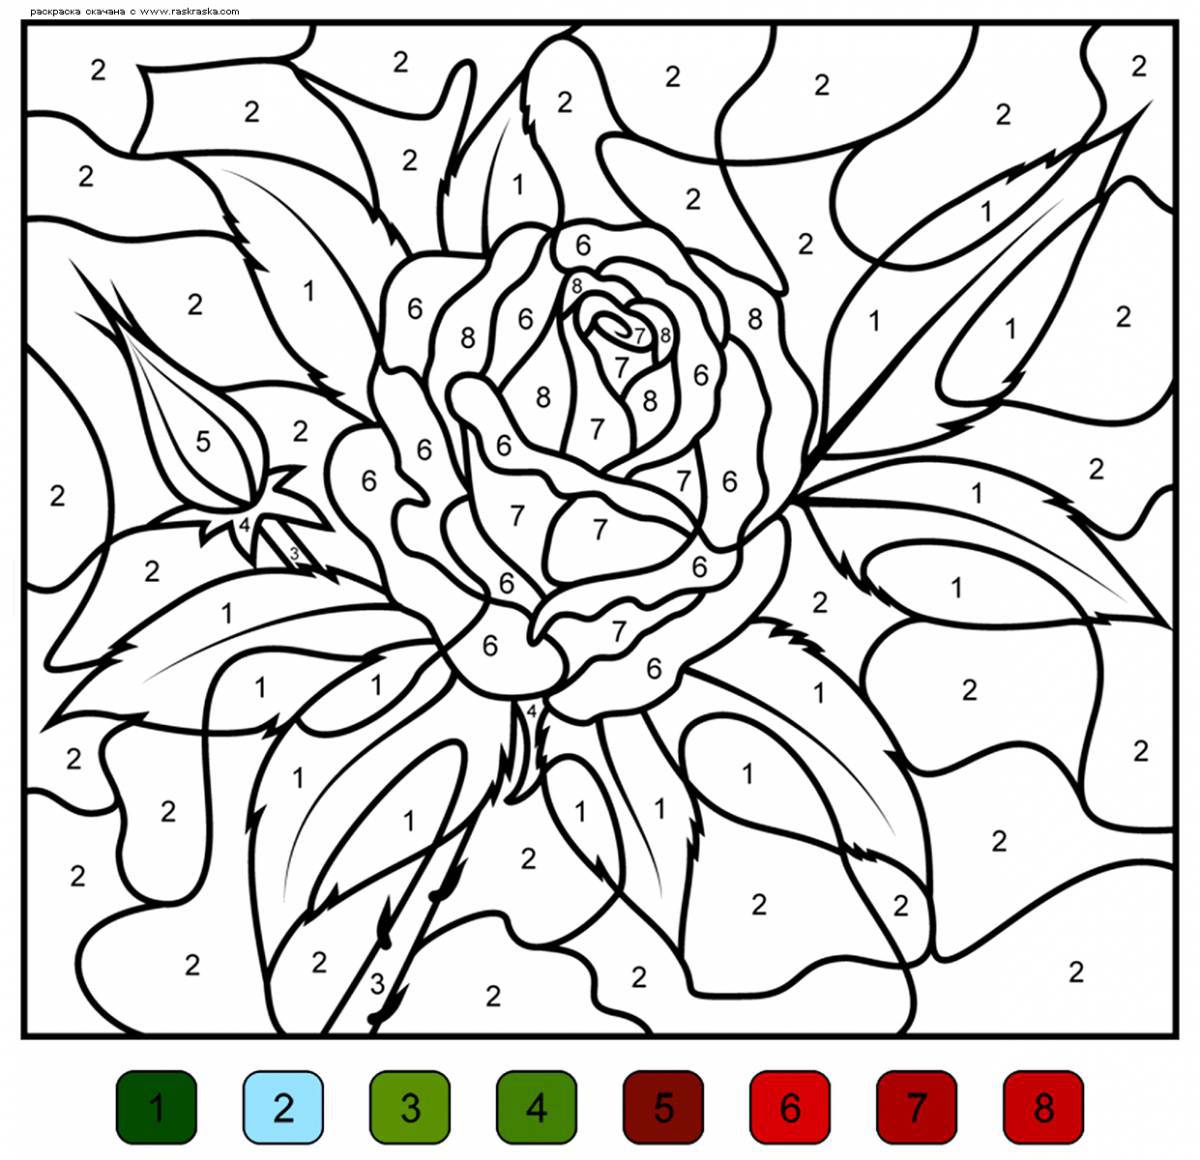 Bright coloring by numbers for all adults on your phone